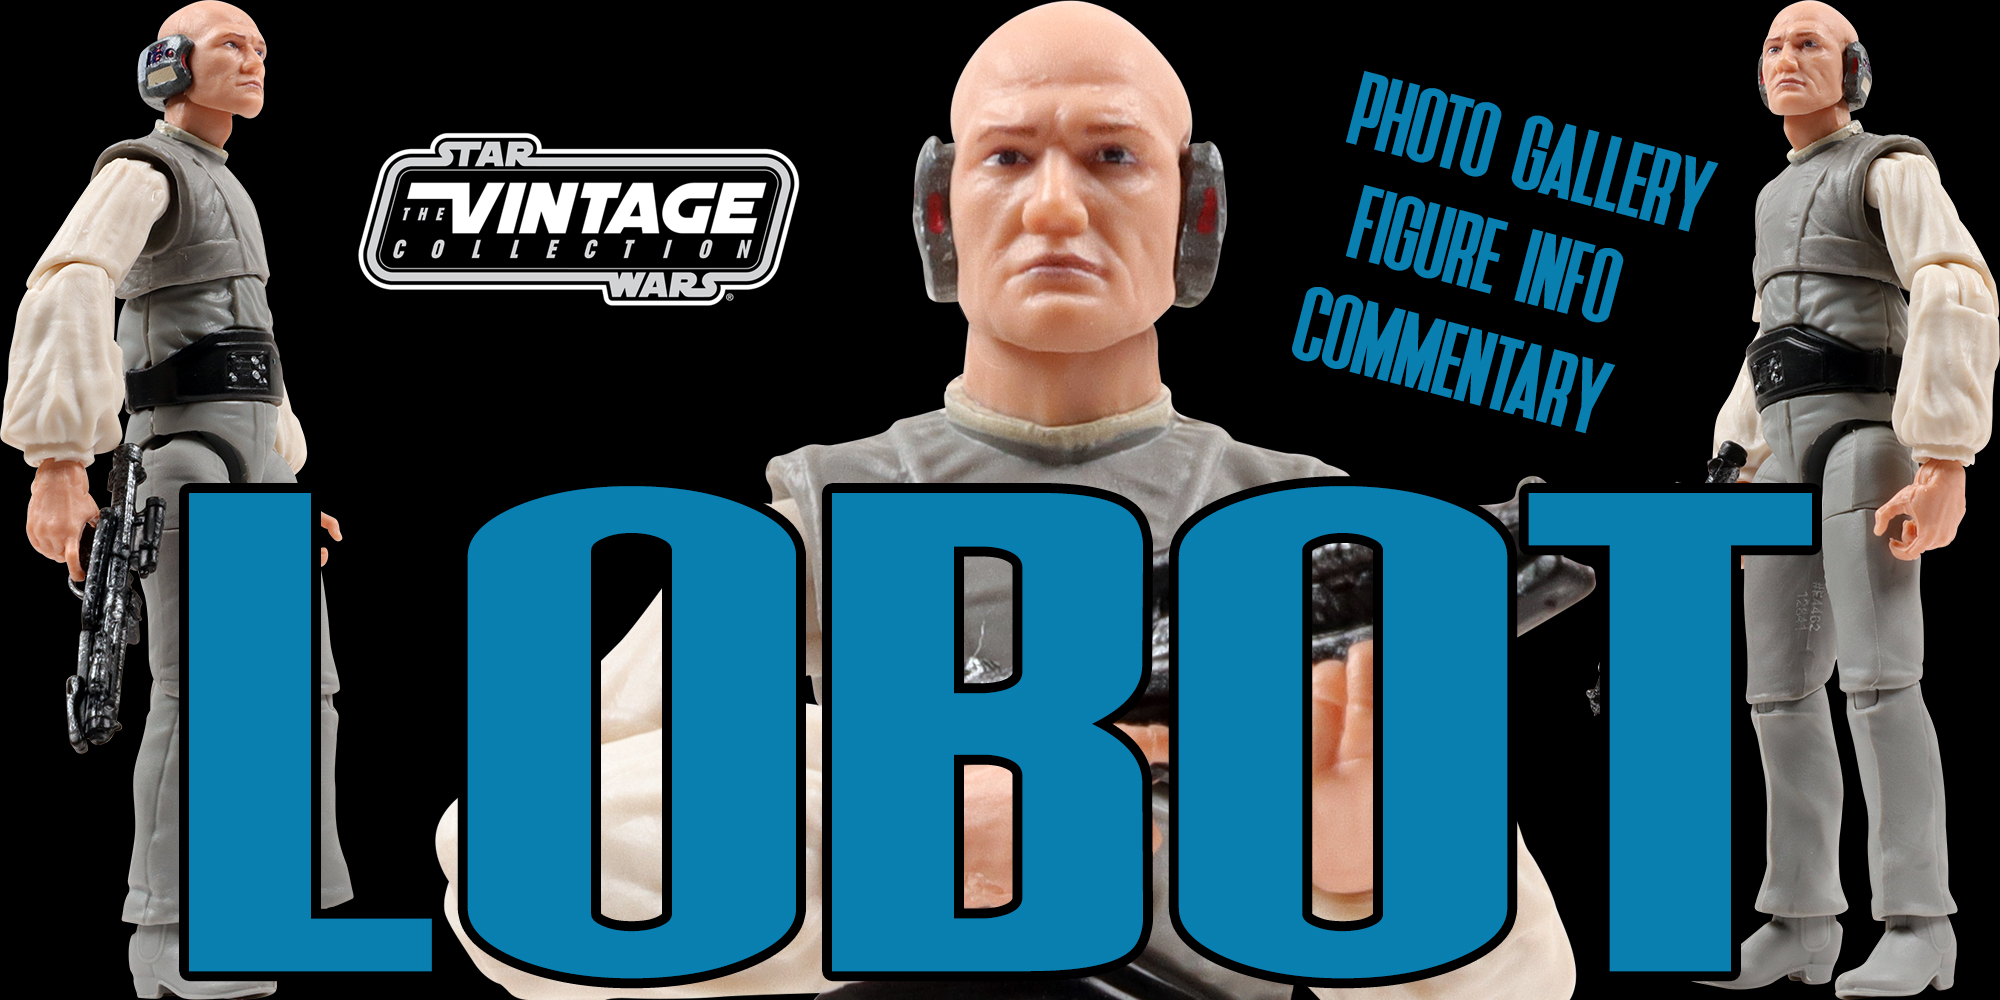 The Vintage Collection Lobot